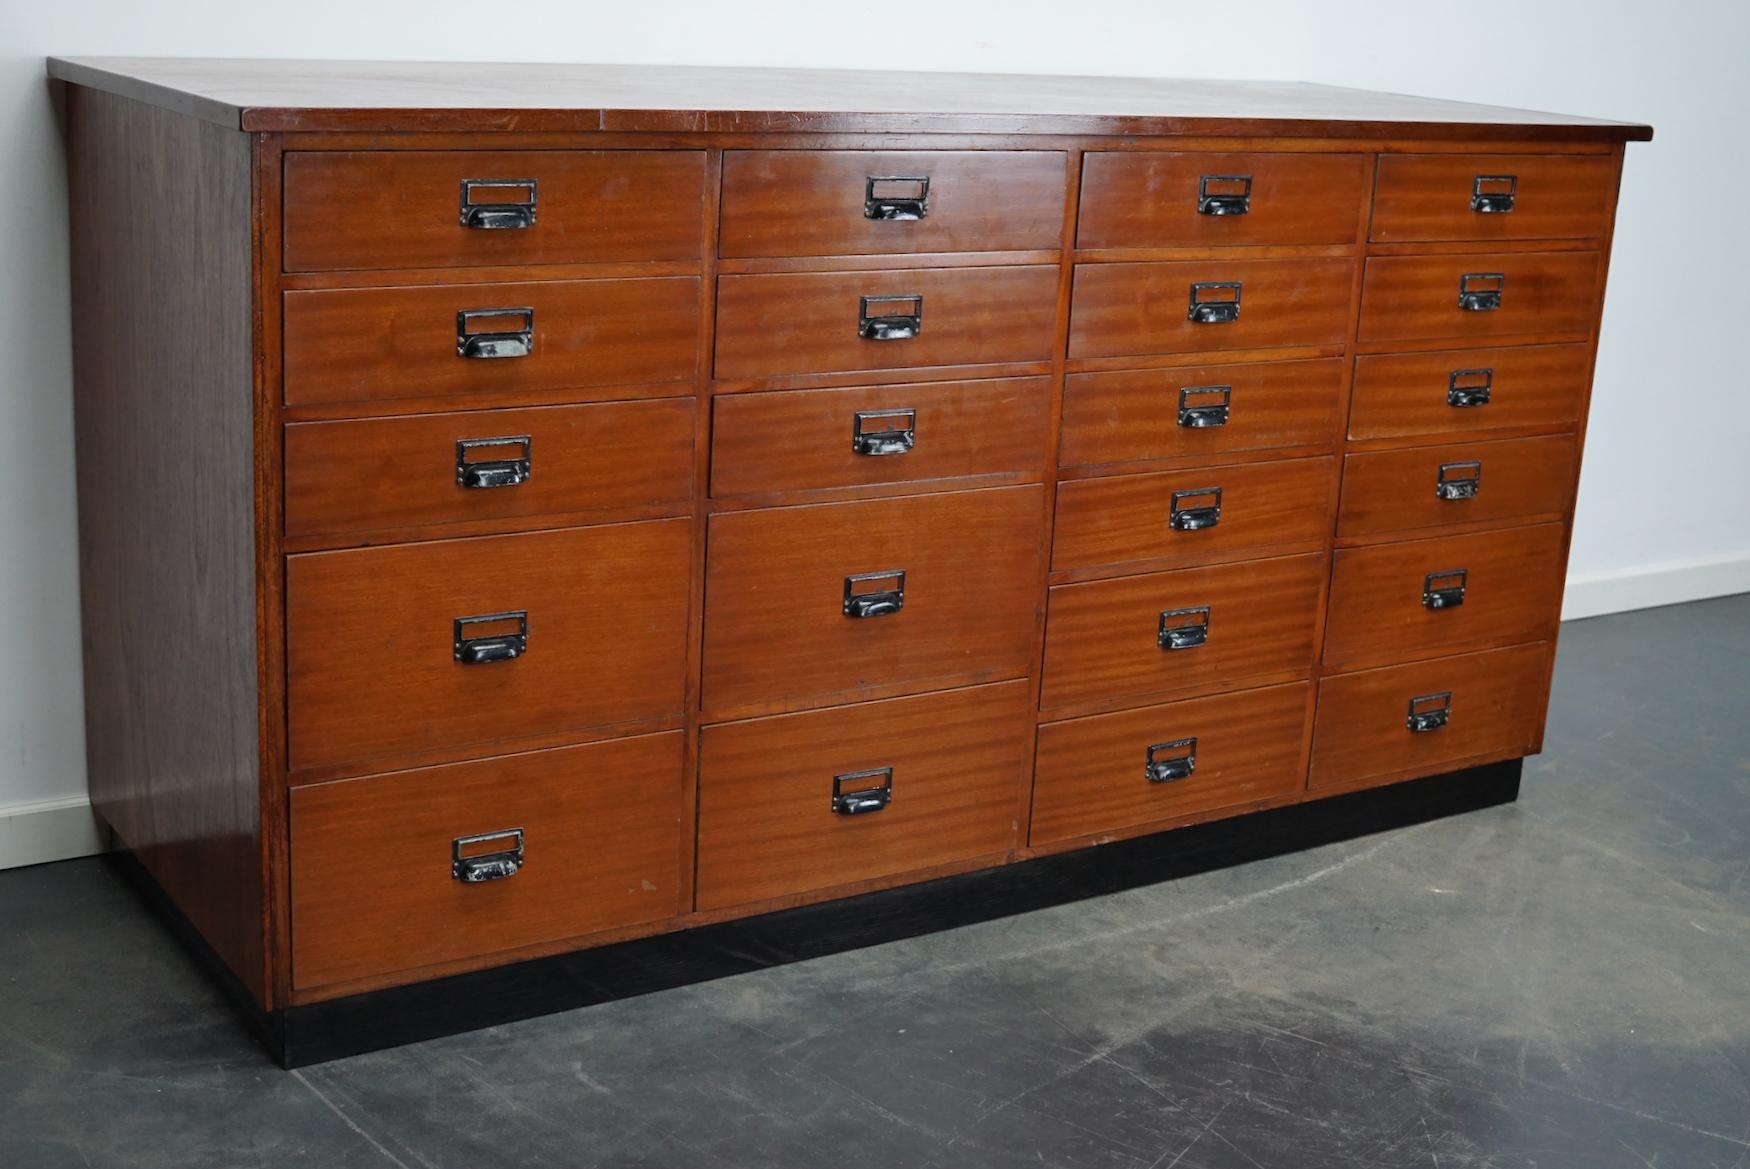  Dutch Industrial Mahogany Apothecary Cabinet, Mid-20th Century For Sale 1